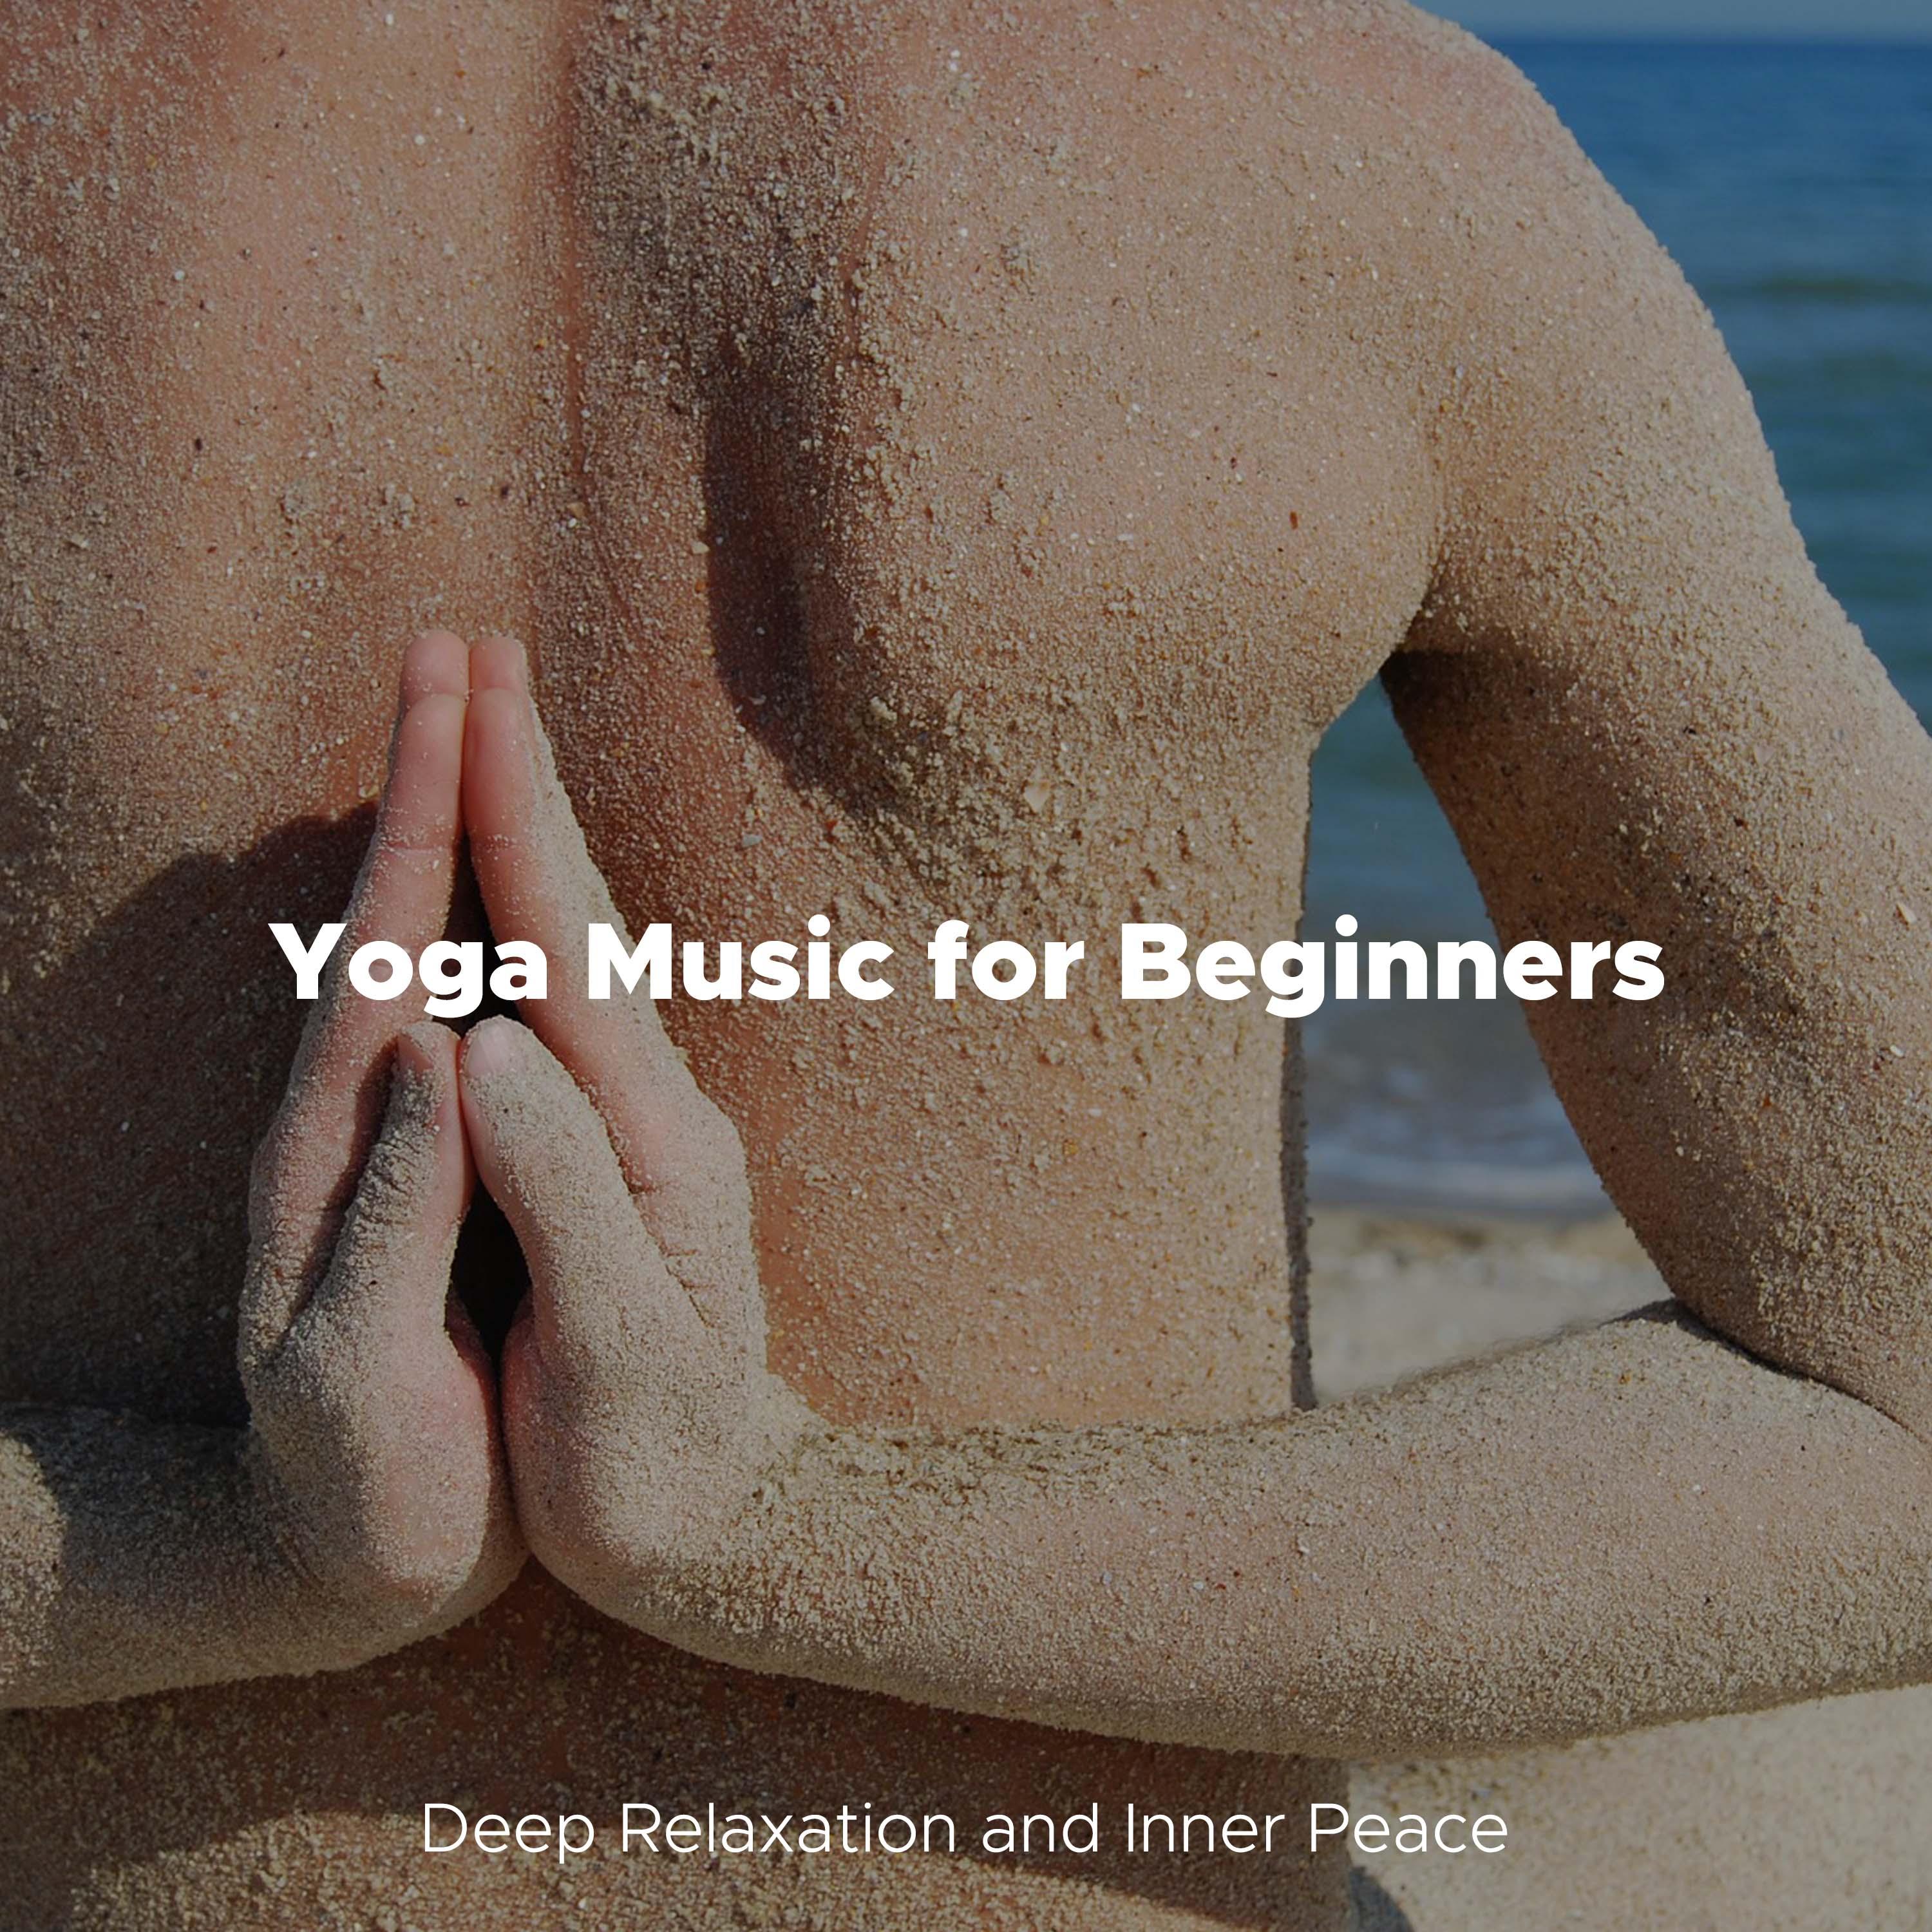 Yoga Music for Beginners: Deep Relaxation and Inner Peace